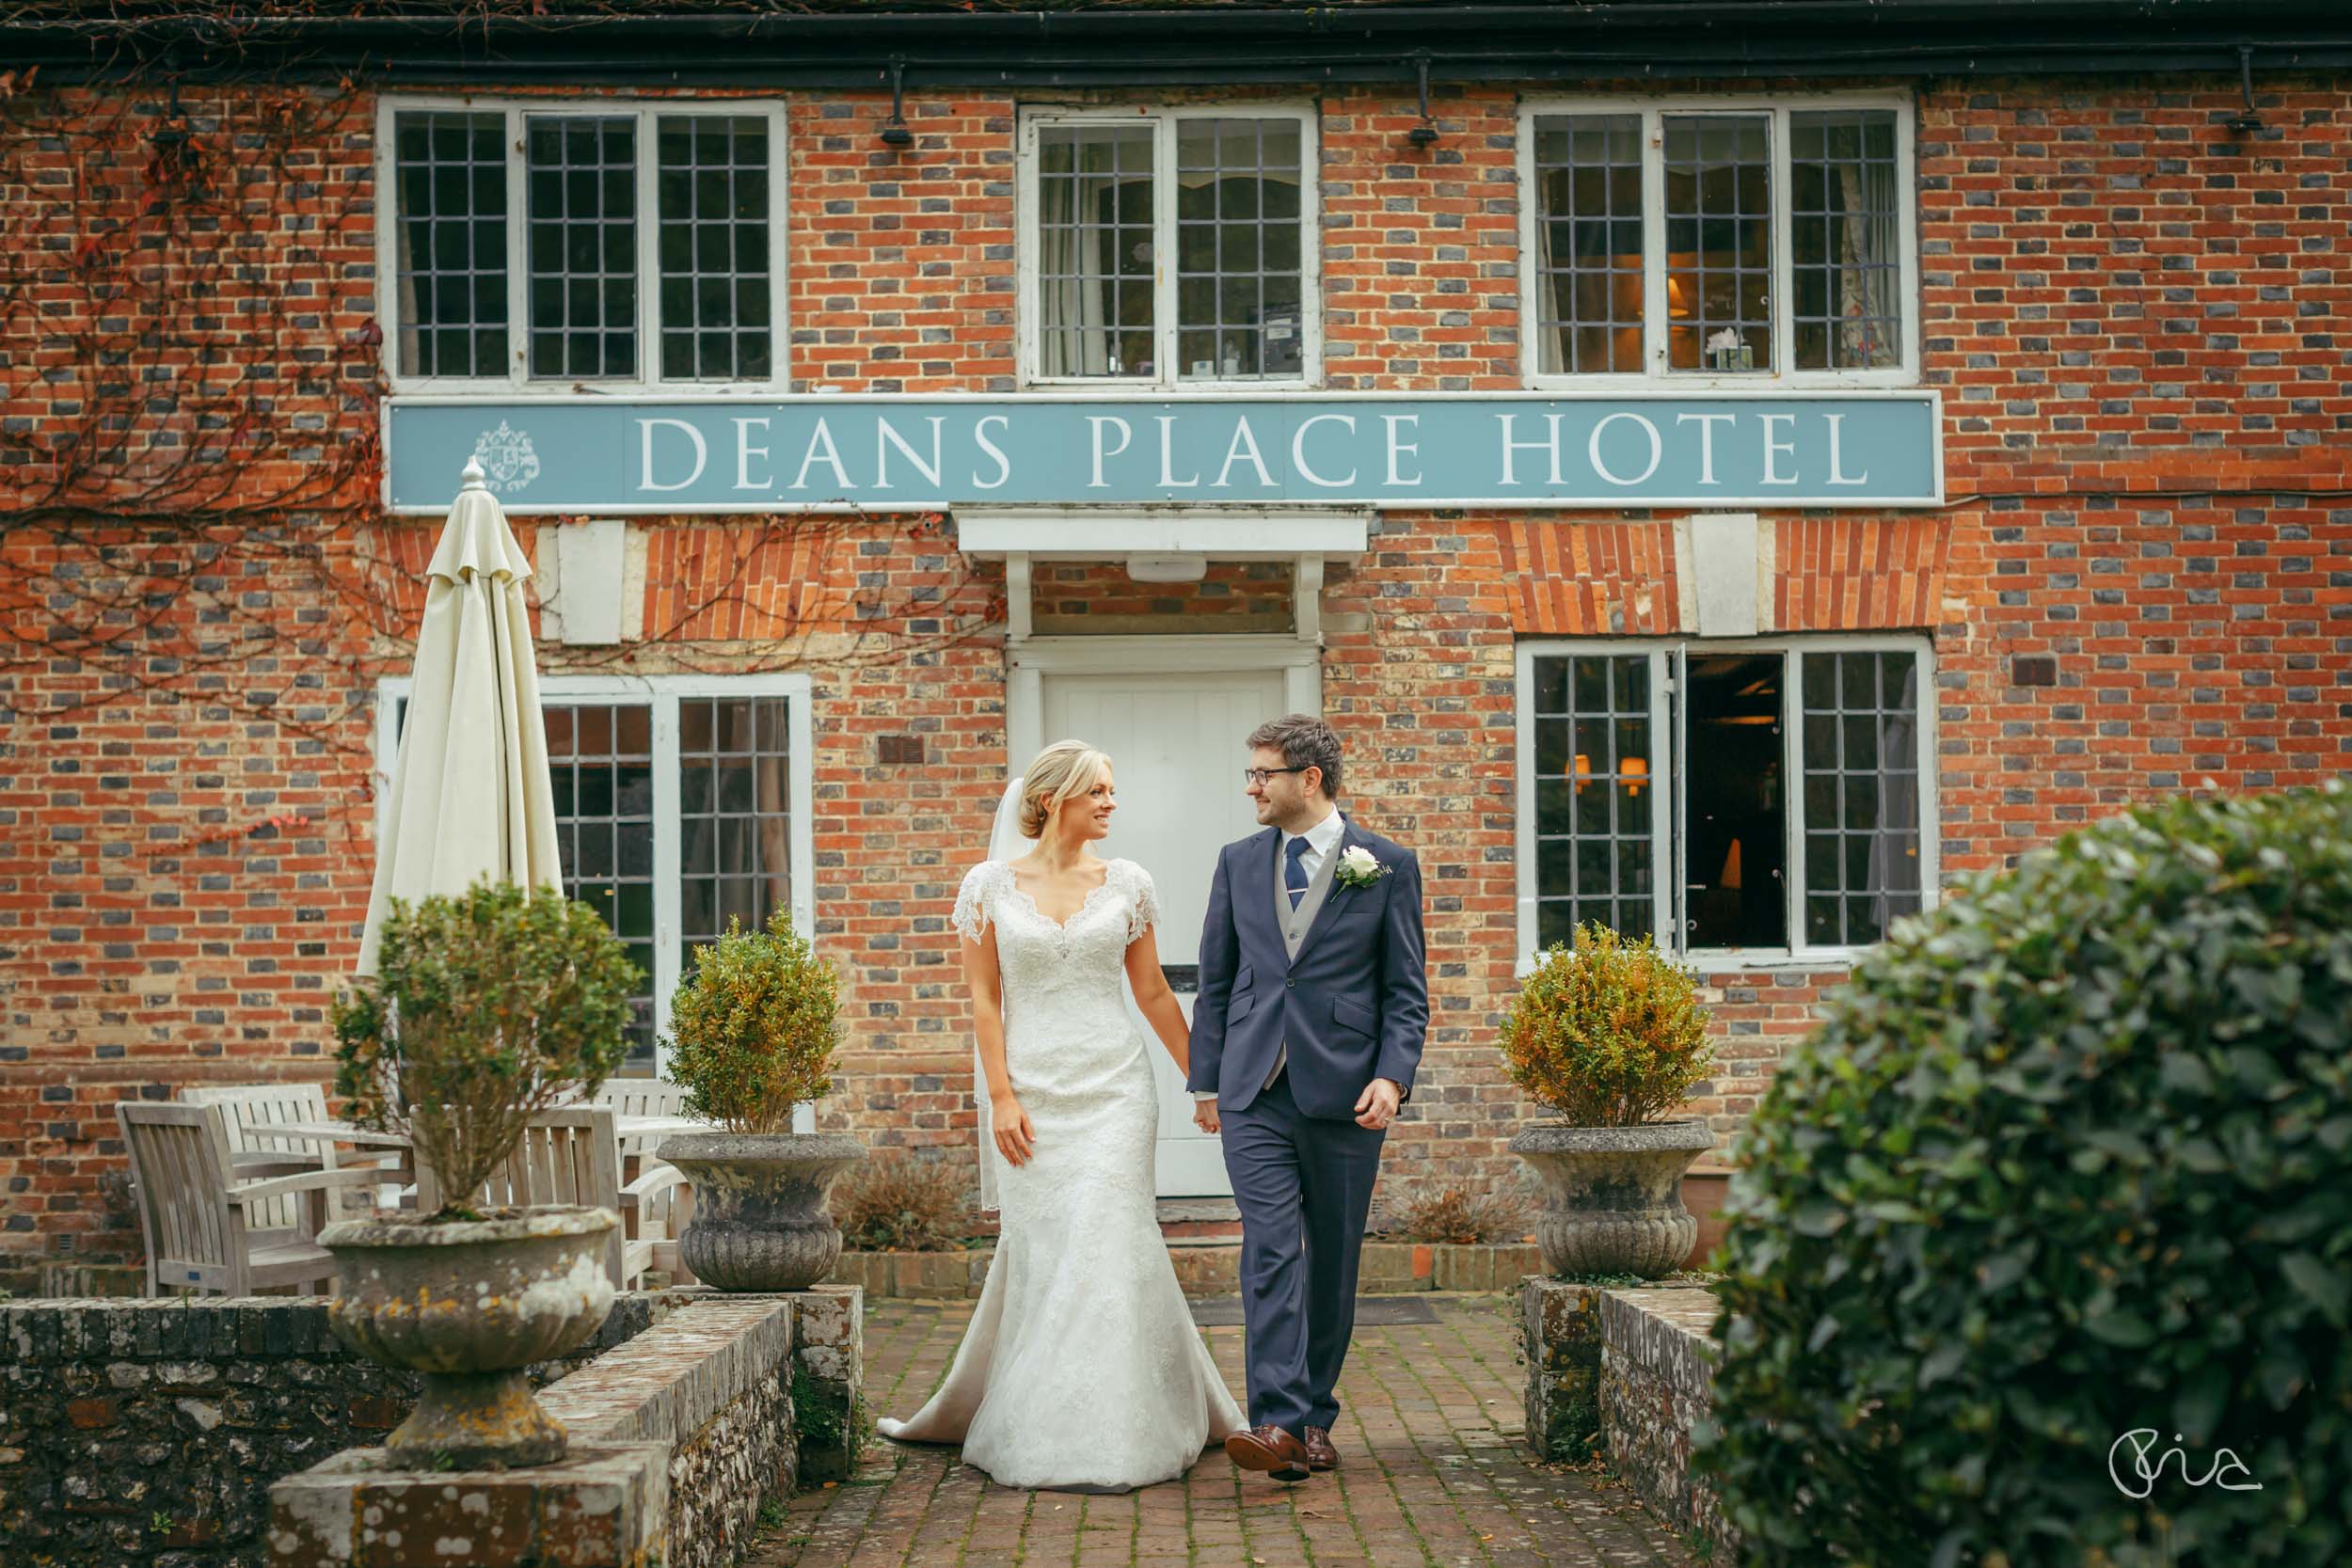 Deans Place Hotel wedding in Alfriston, East Sussex